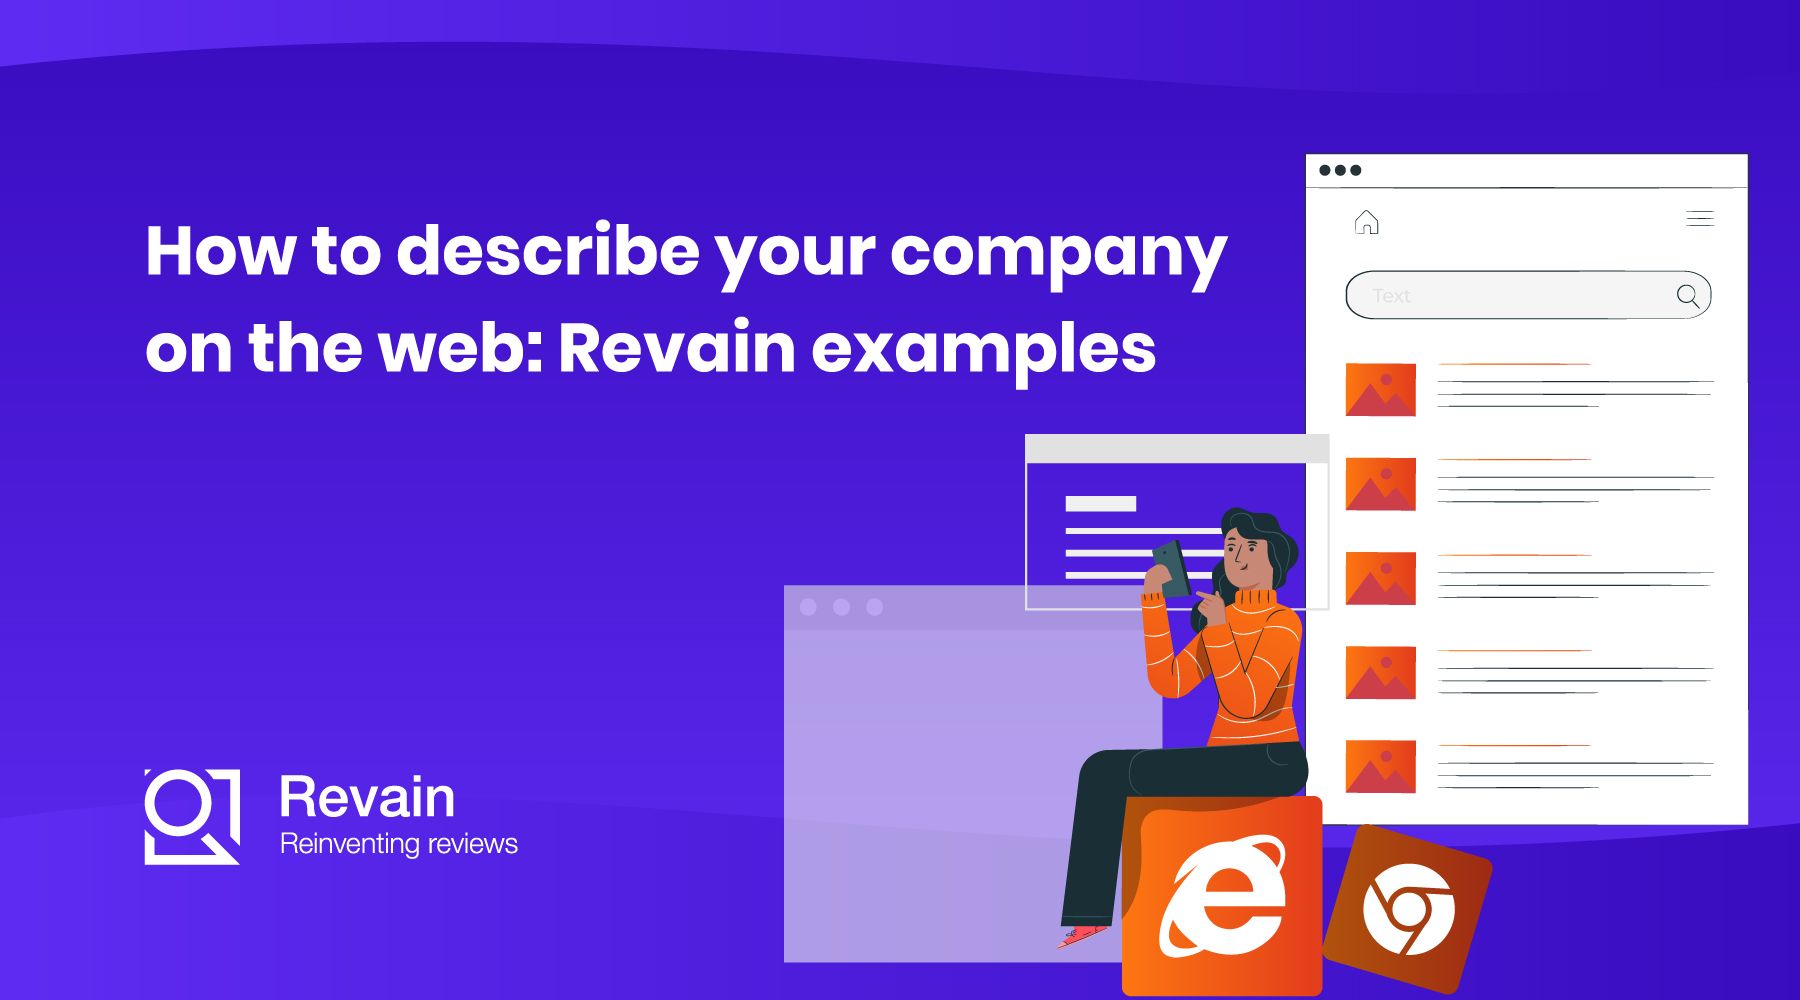 How to describe your company on the web: Revain examples